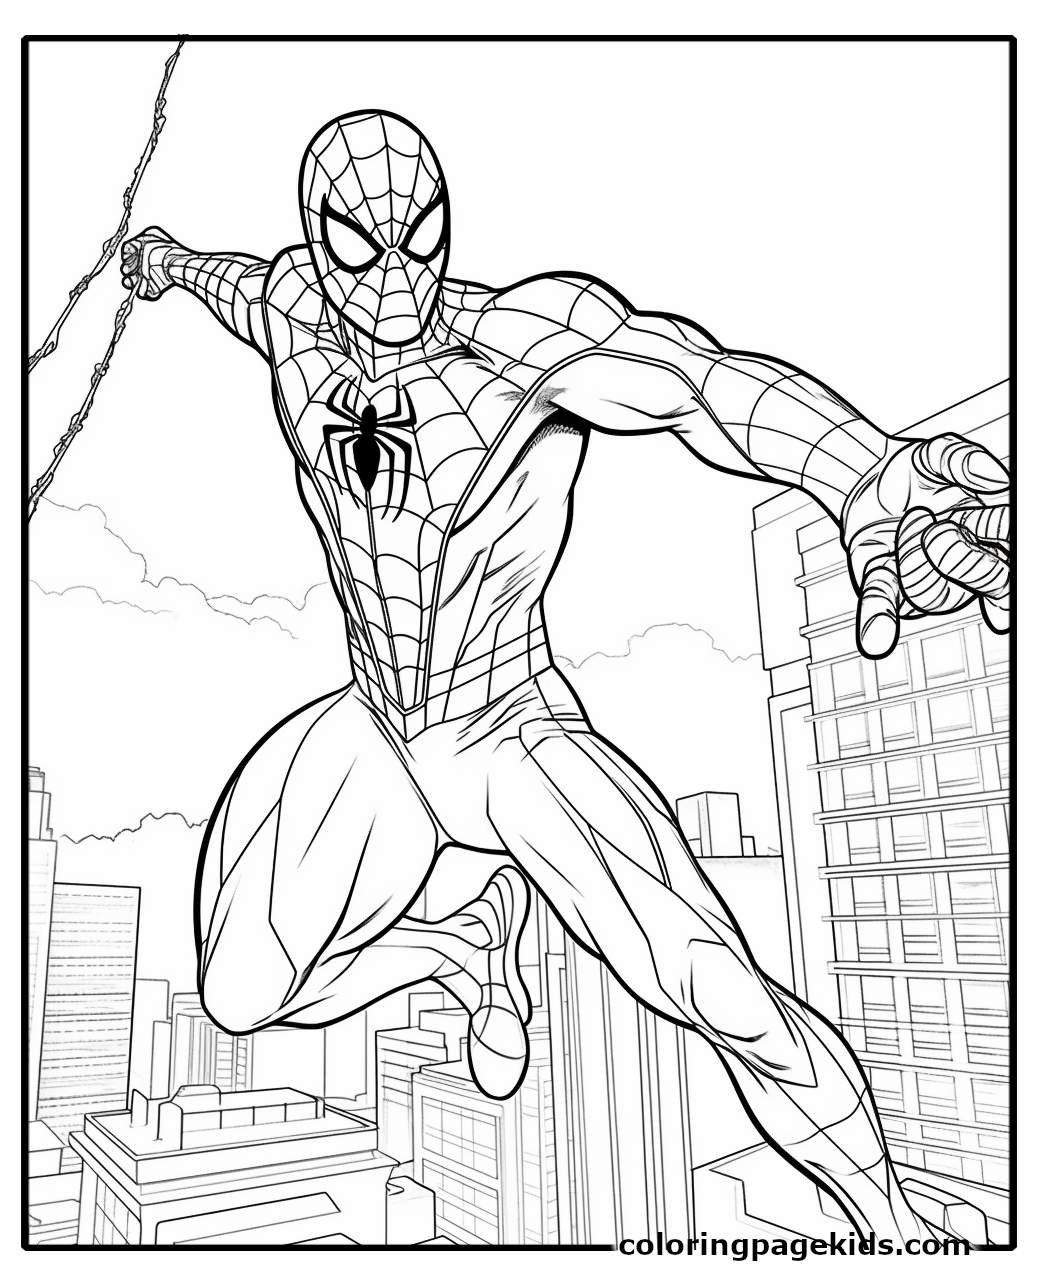 Free Printable Spider-Man: No Way Home Coloring Pages